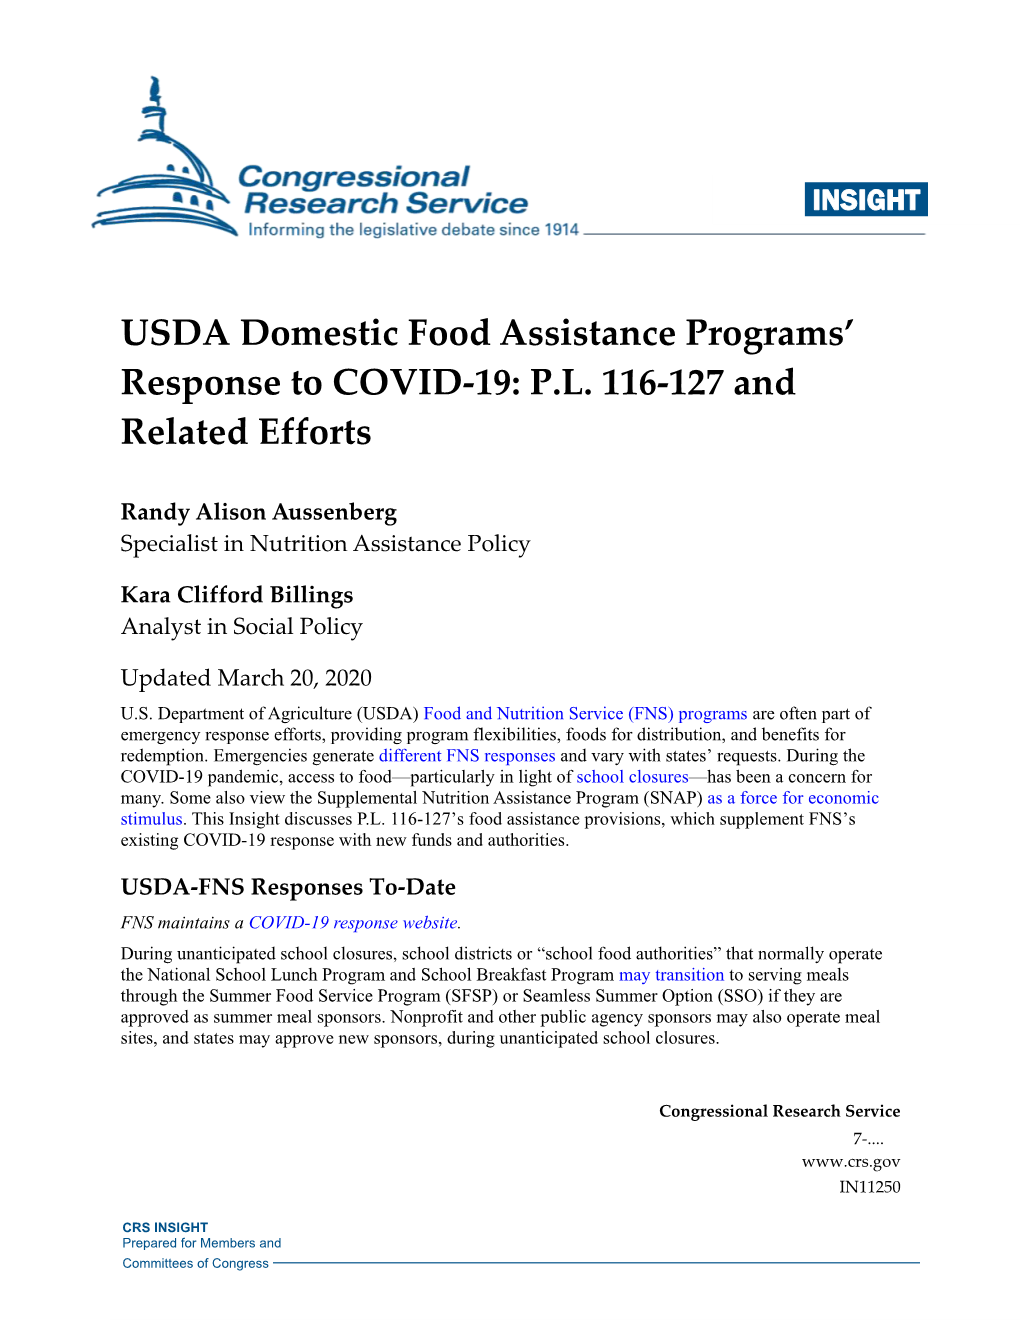 USDA Domestic Food Assistance Programs’ Response to COVID-19: P.L